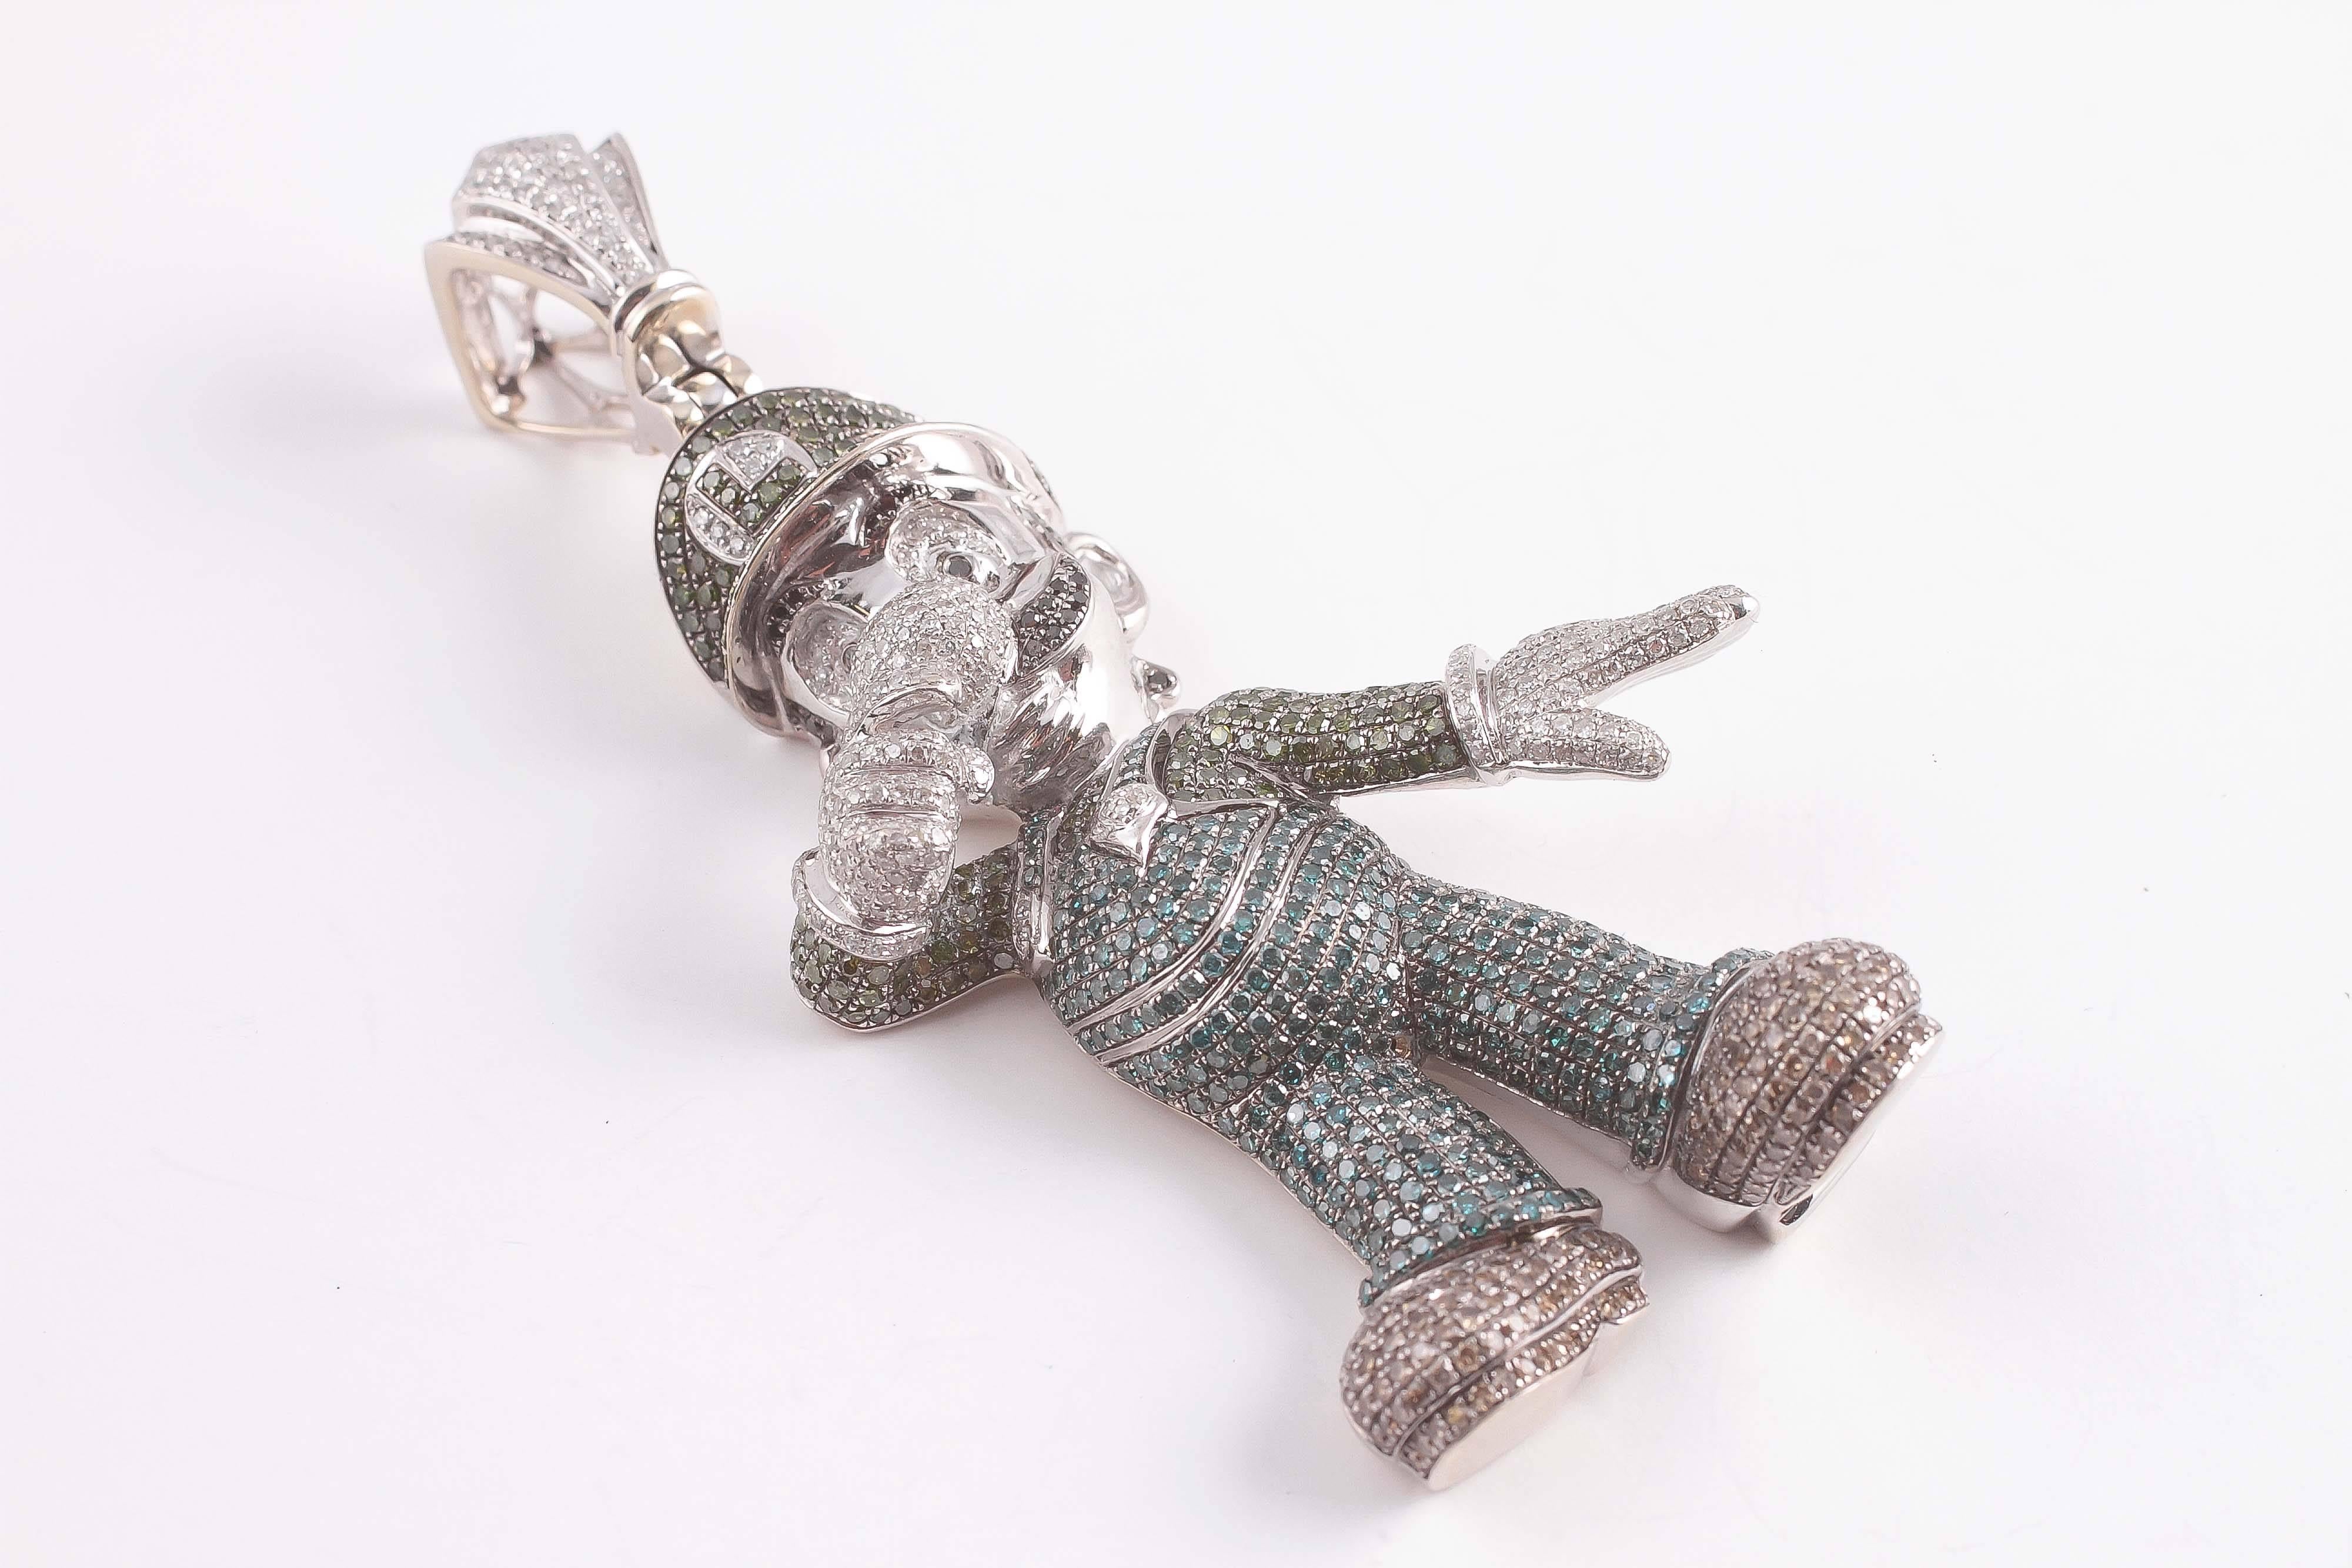 Fabulous and fun!  14 karat white gold with 7.00 cts of pave' colored diamonds.  Luigi is Looking.  Help him find a home.  